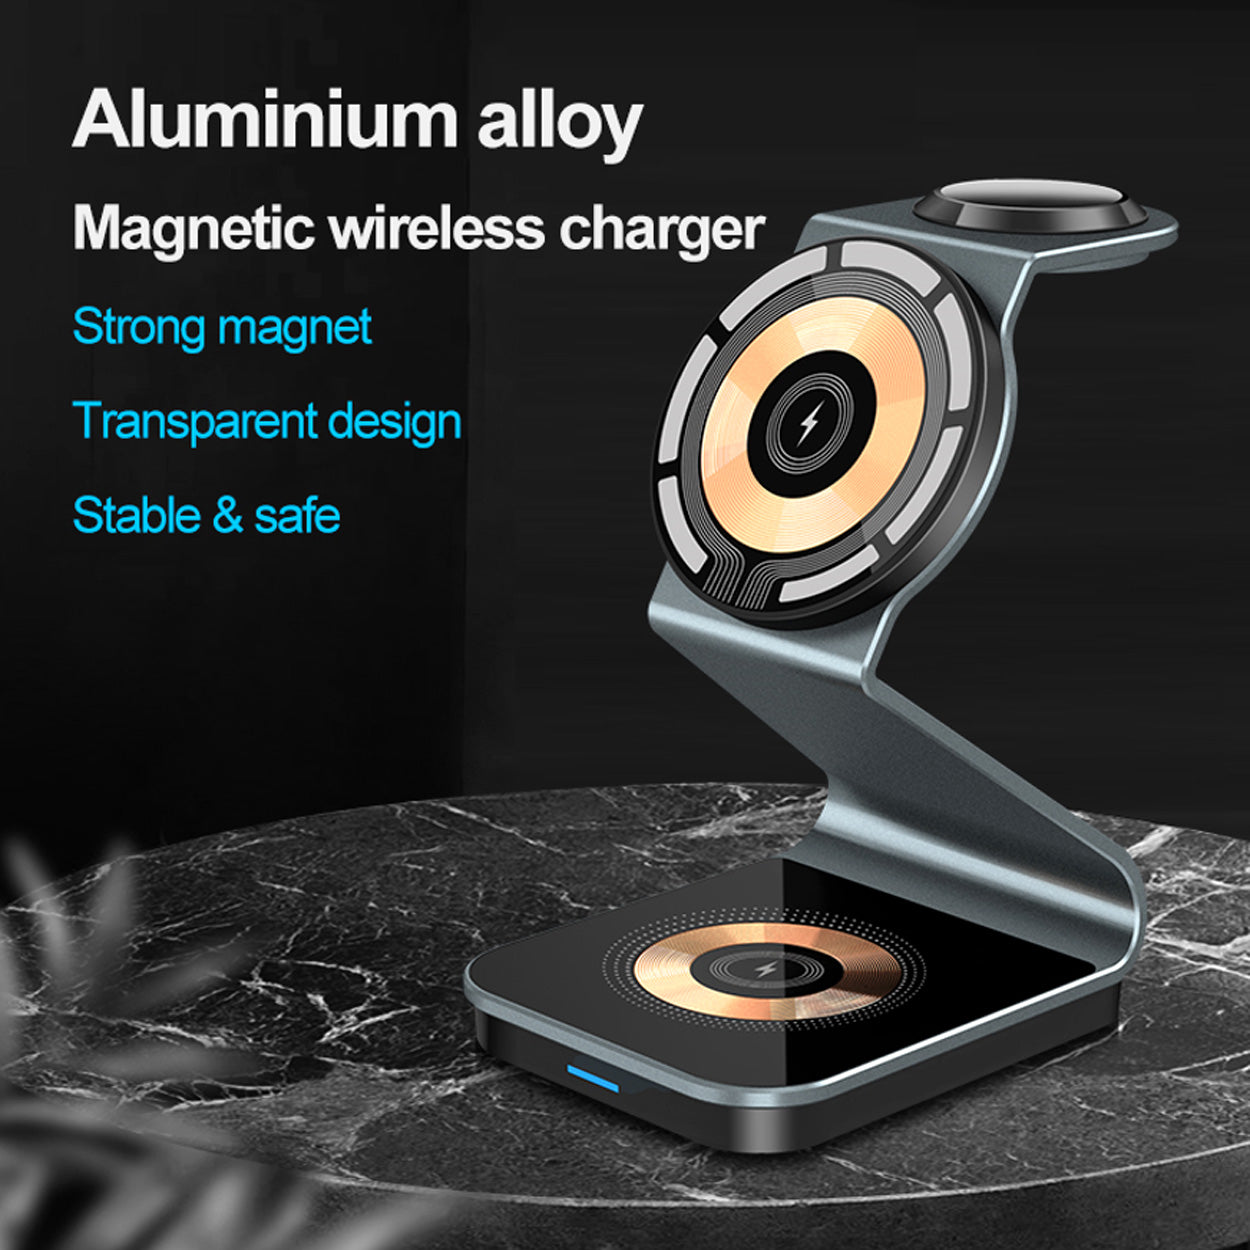 3-in-1 Magnetic 15W Wireless Charging Station - VS5 - 2